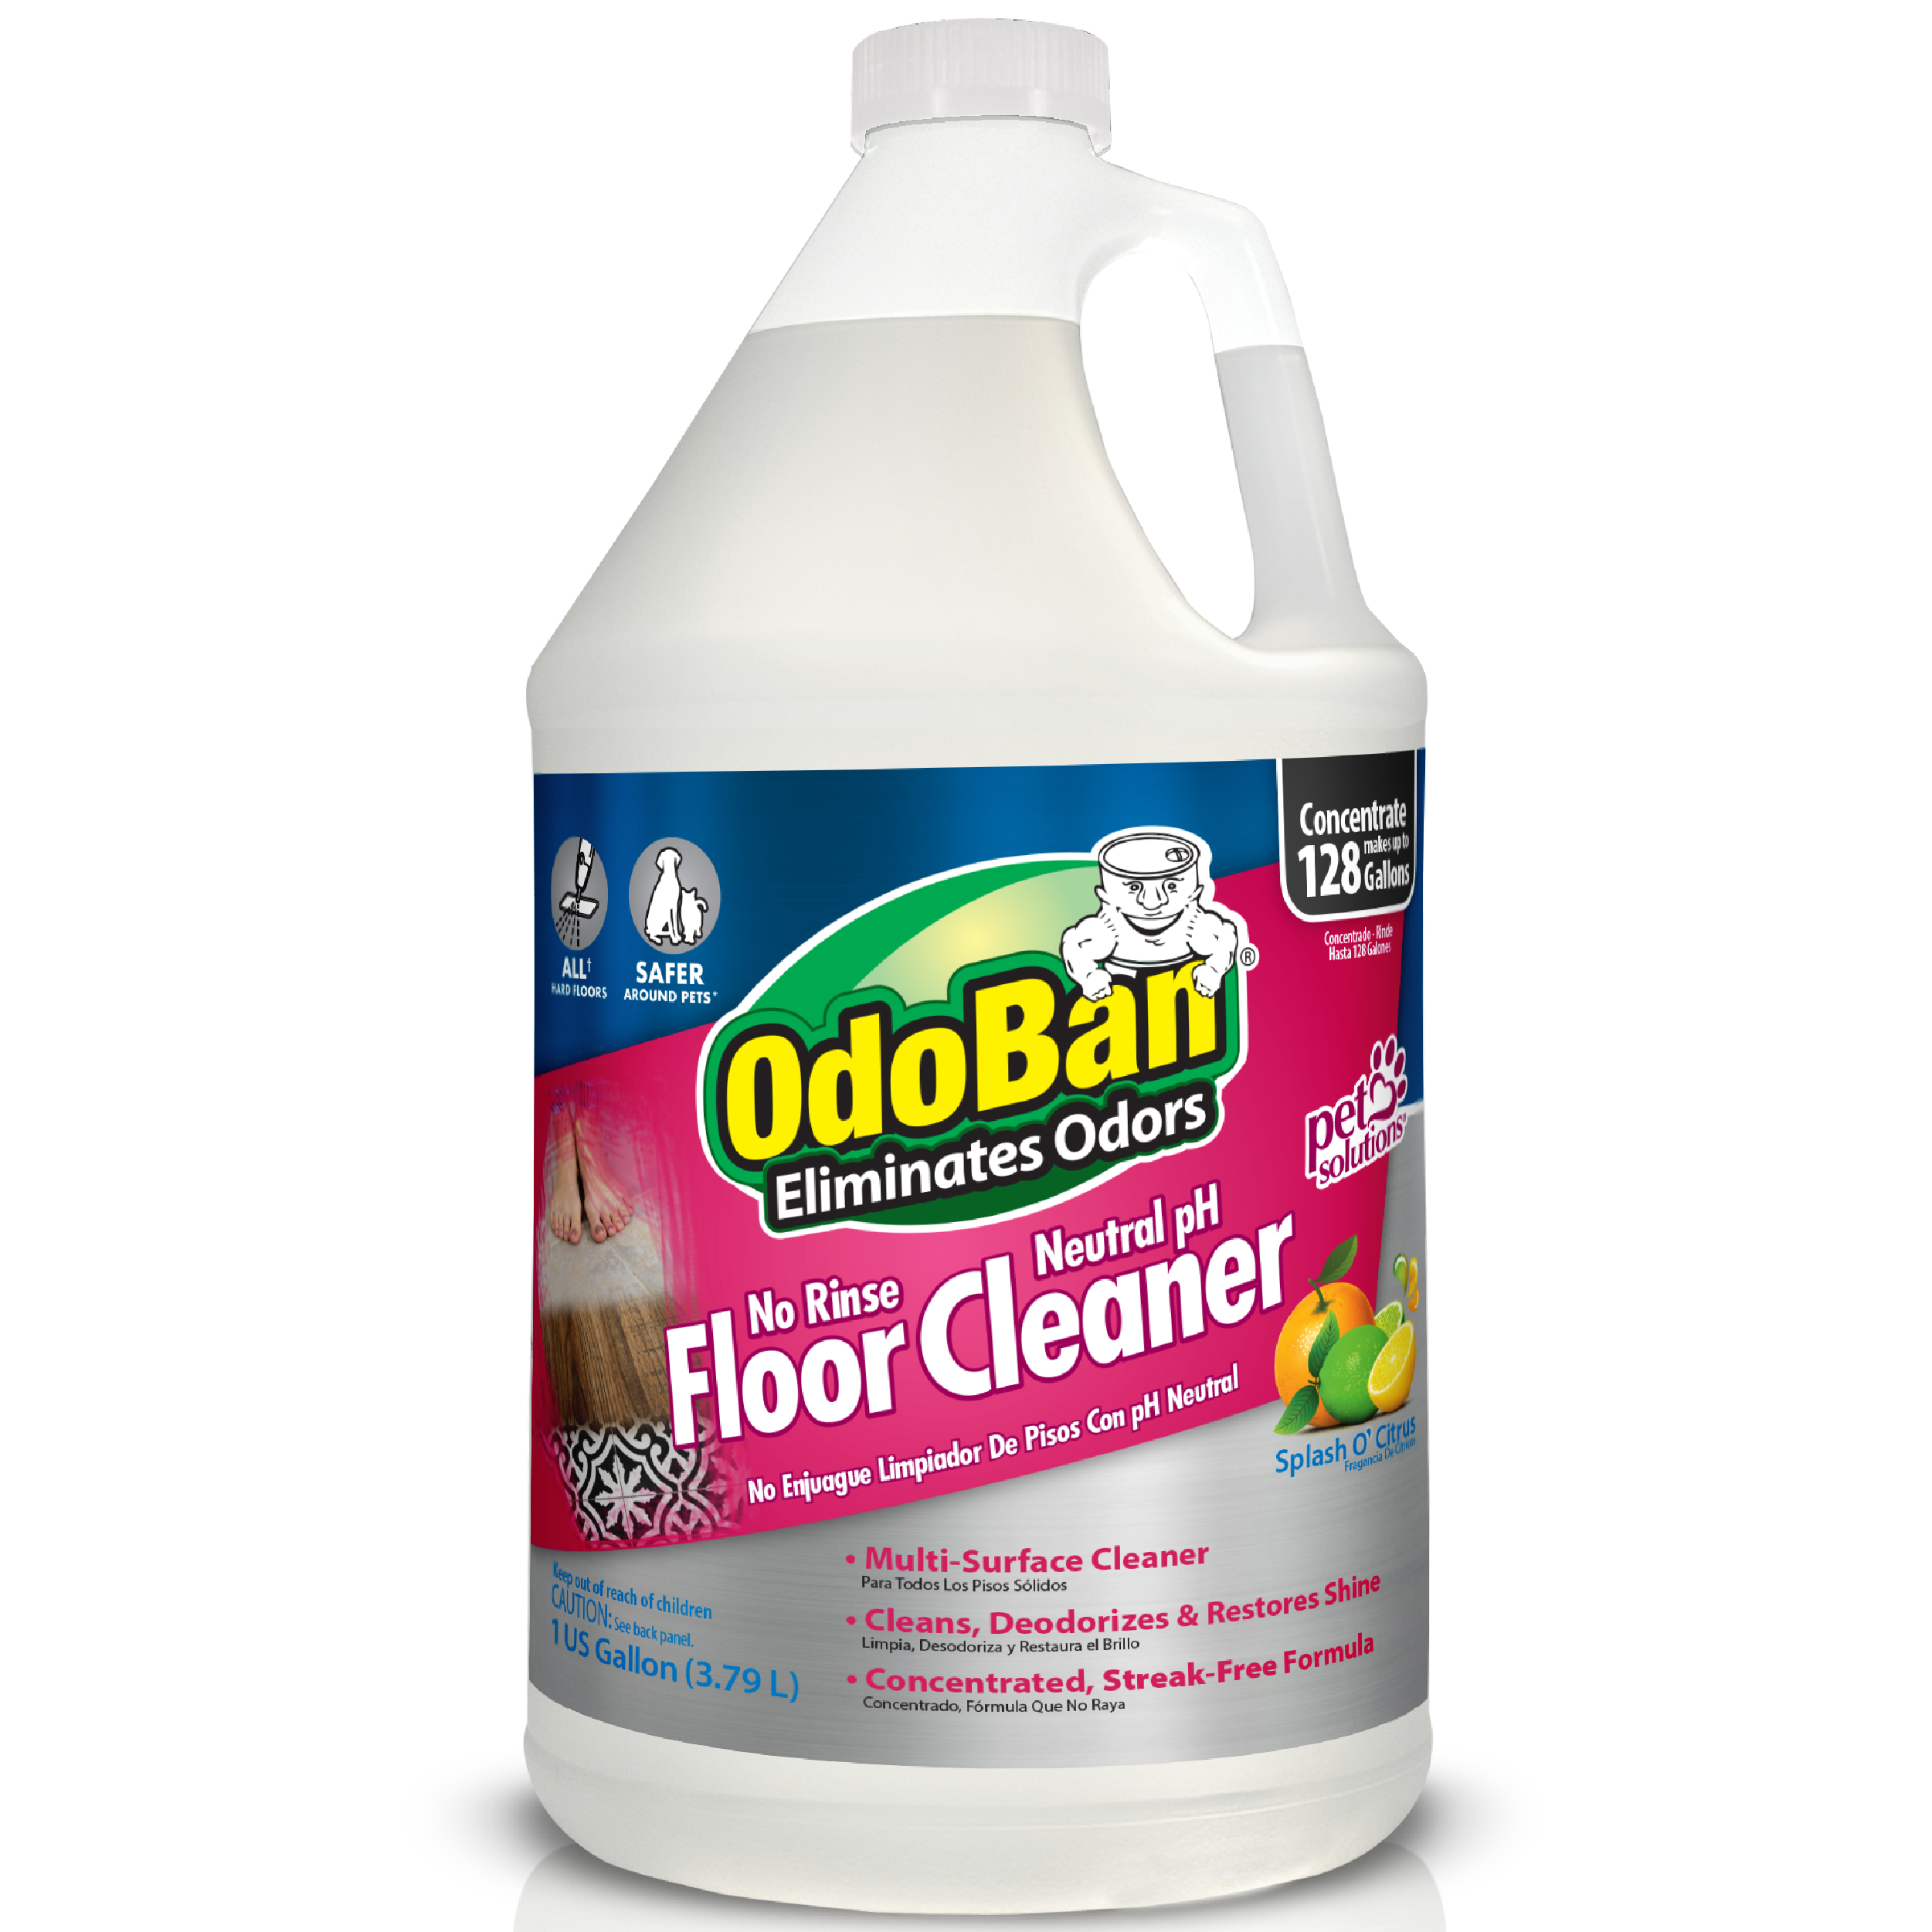 NAB Citrus Cleaner is a Heavy Duty Industrial Orange Cleaner Degreaser